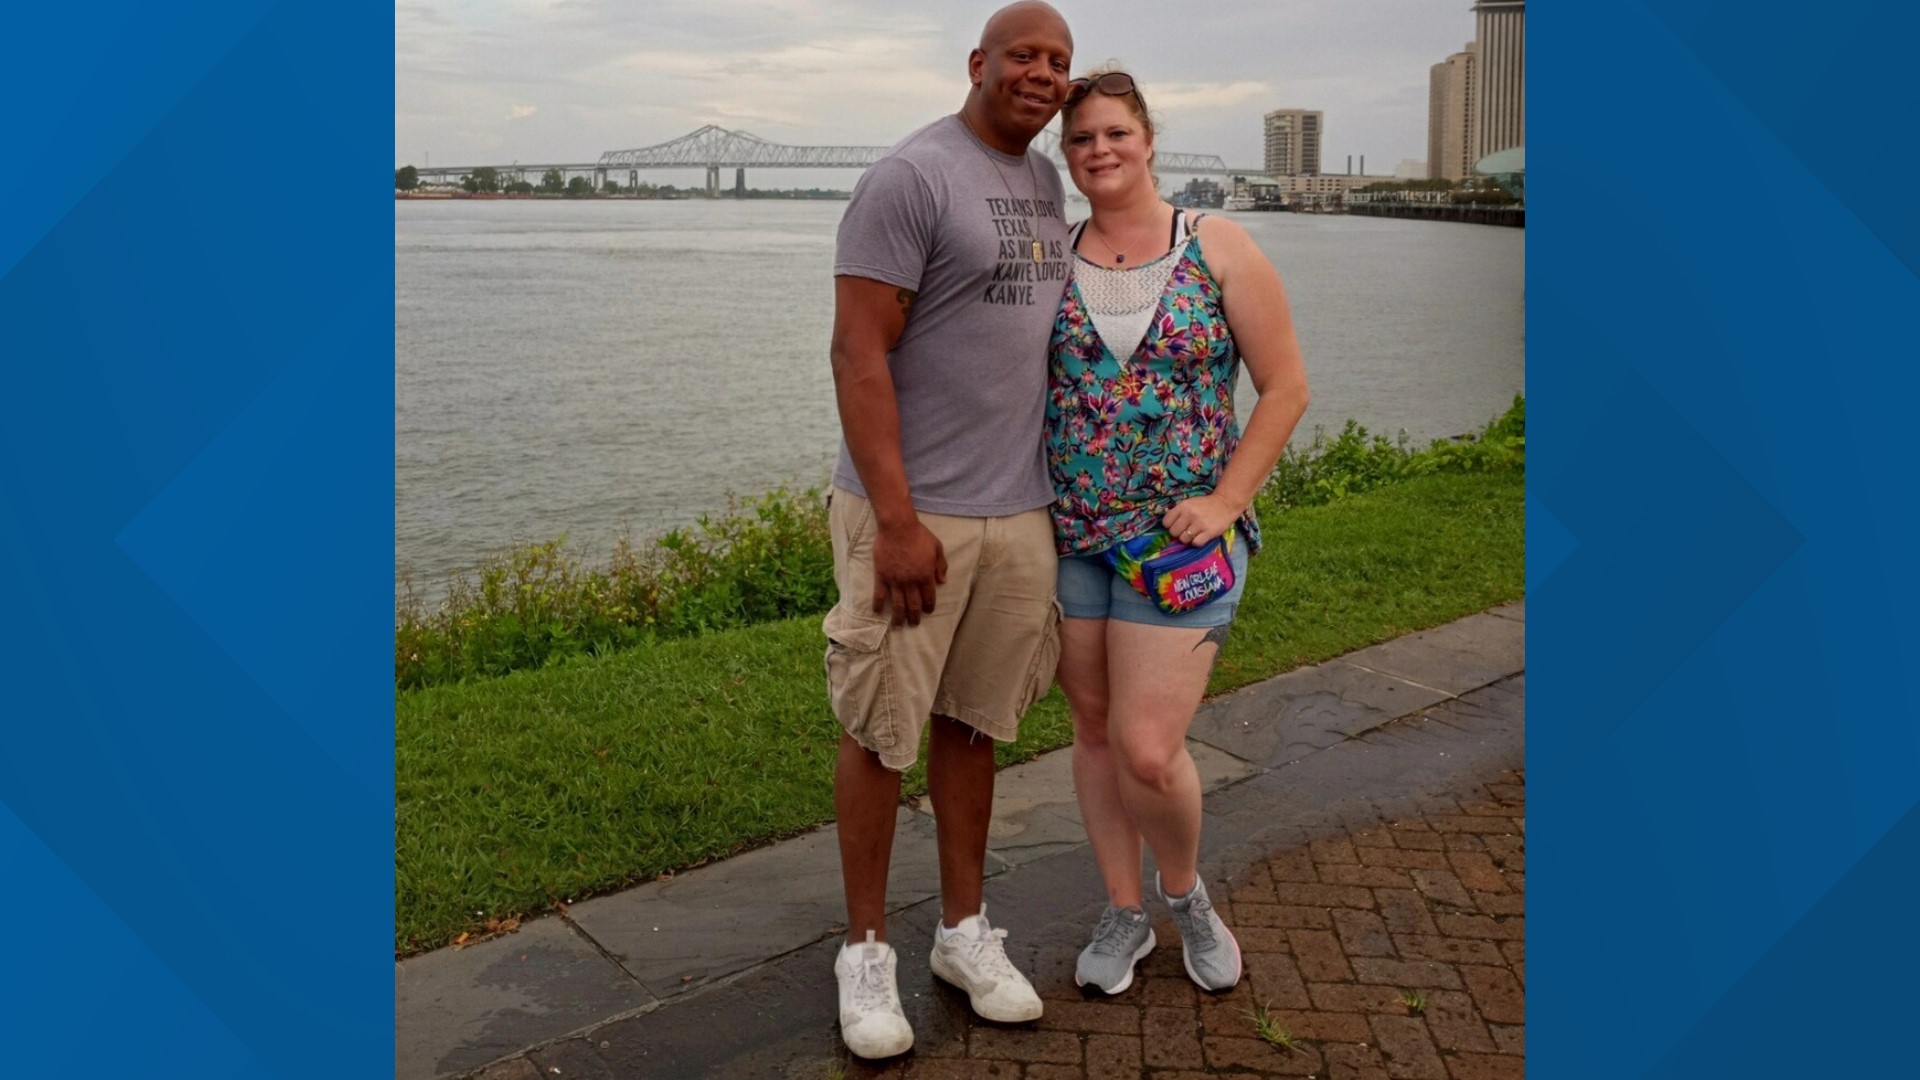 Krystyn Comeaux and her partner, Justin Hicks, traveled to NOLA for his birthday, then Hurricane Ida hit. The couple's flights have been cancelled three times.